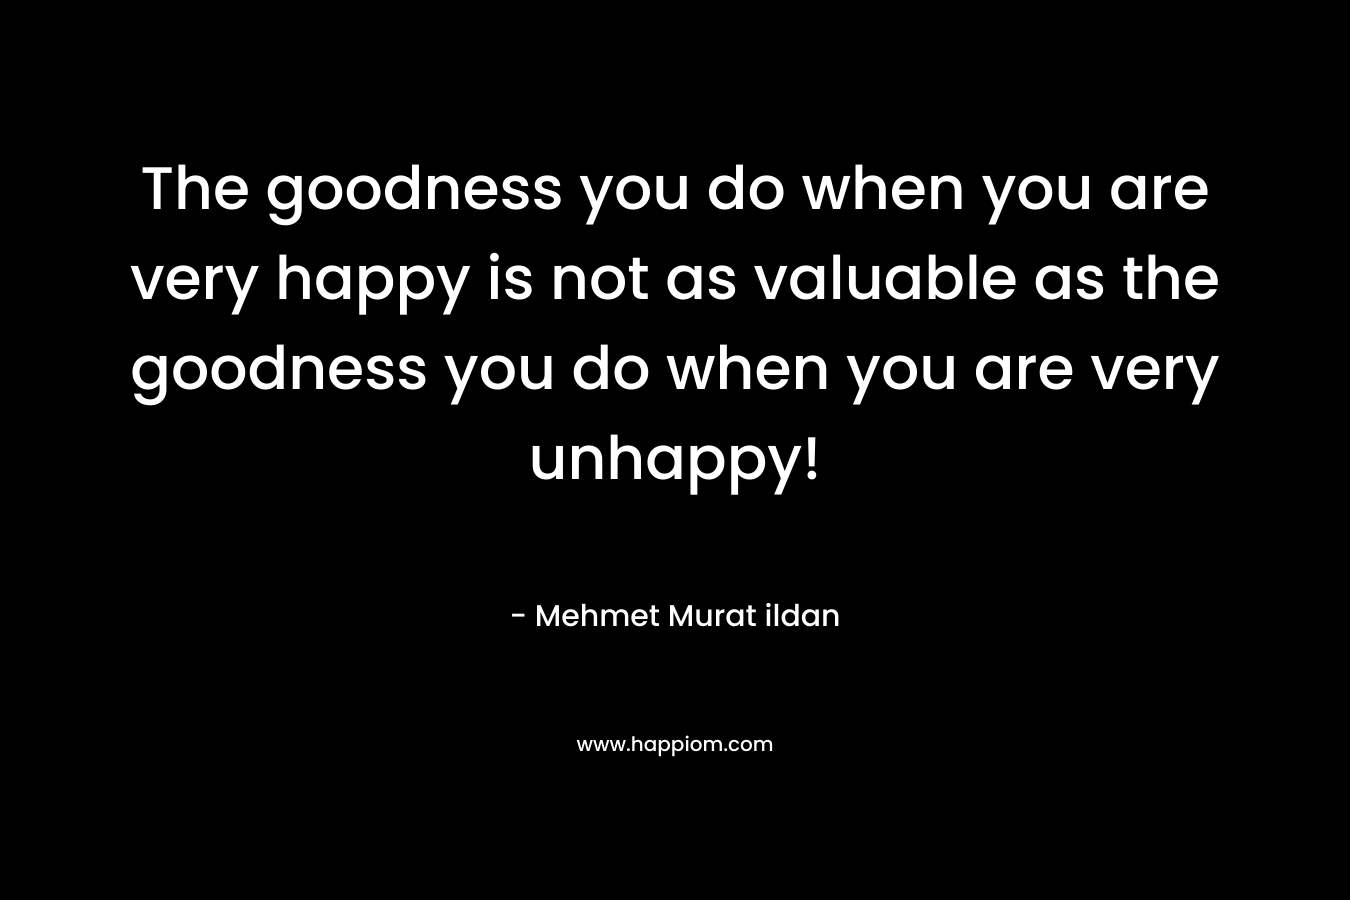 The goodness you do when you are very happy is not as valuable as the goodness you do when you are very unhappy! – Mehmet Murat ildan